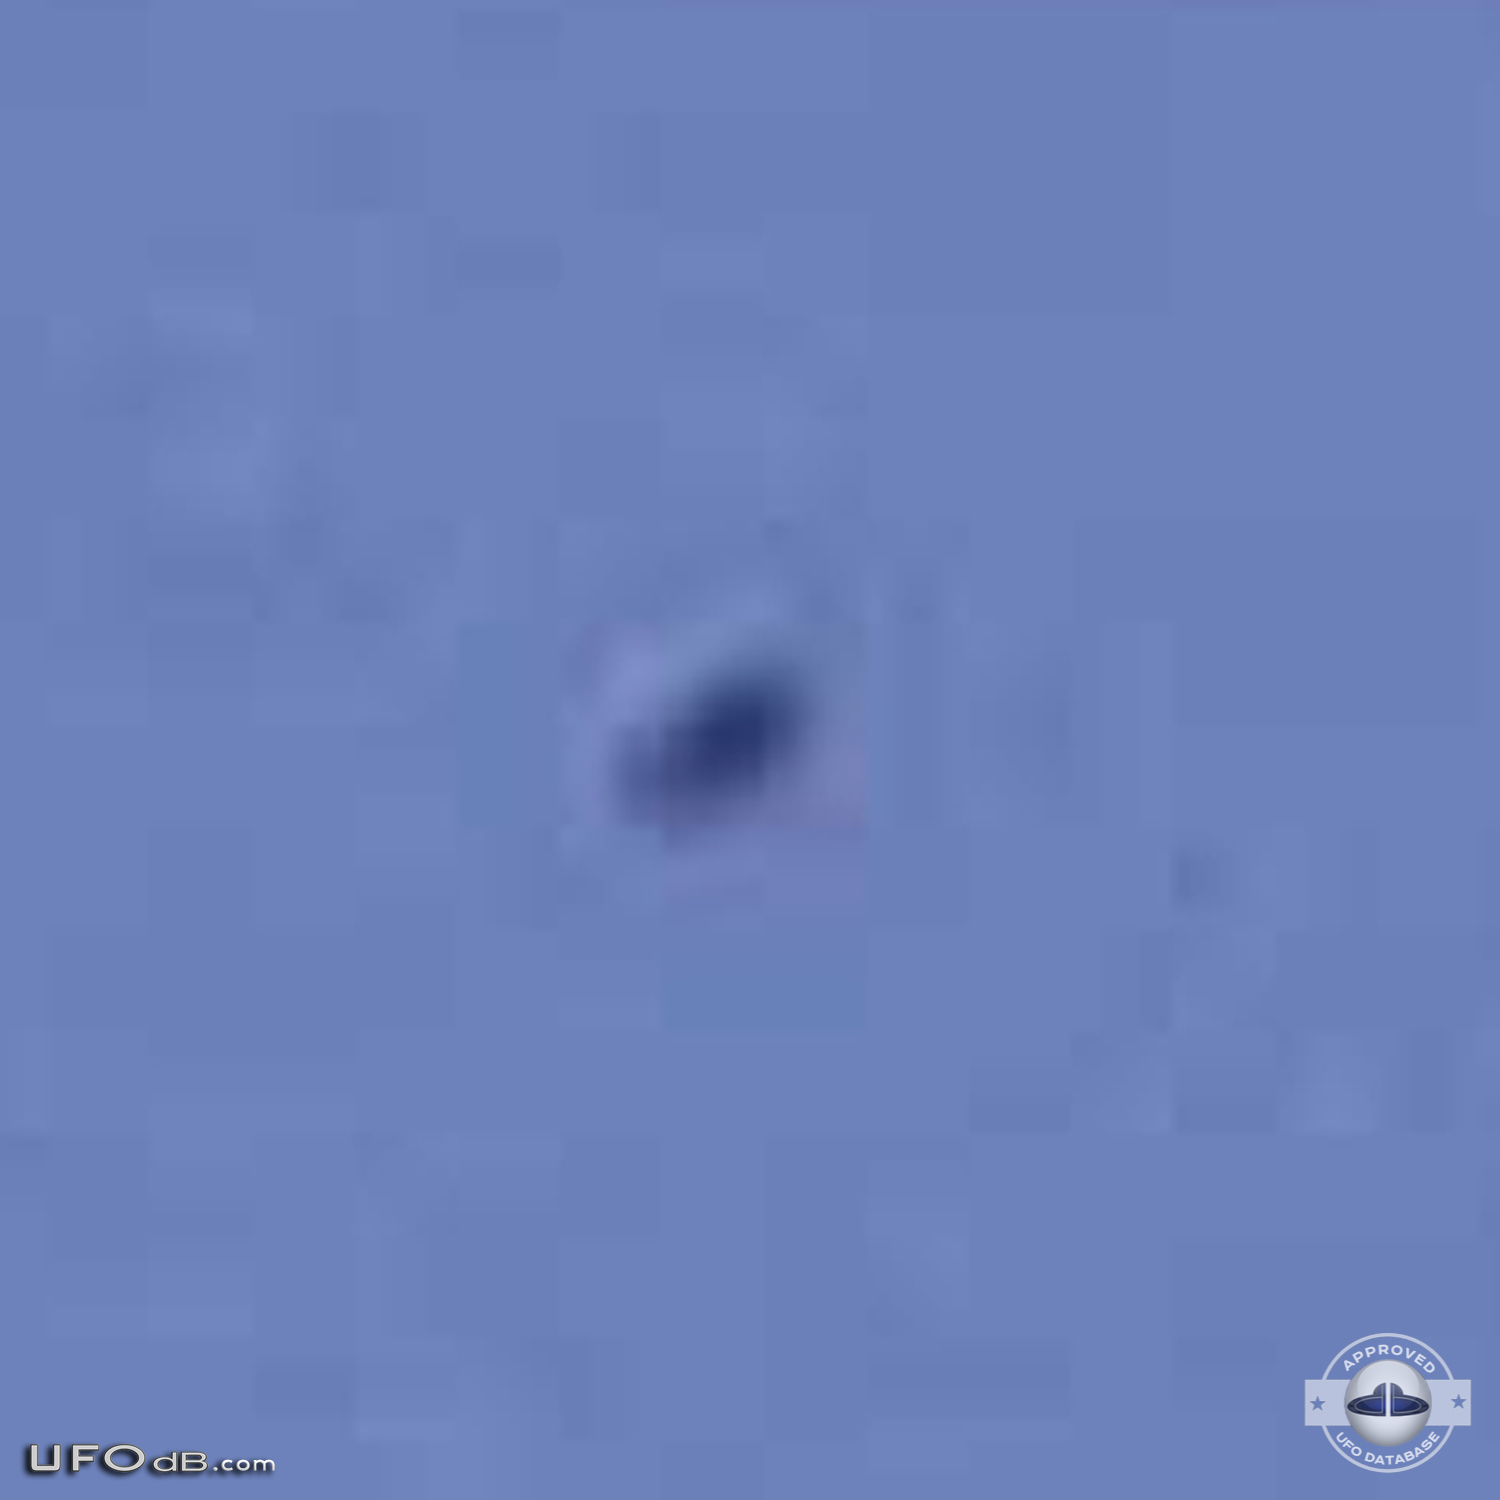 Newyorker with 170 ufo sightings gives us ufo pictures to prove it UFO Picture #401-4